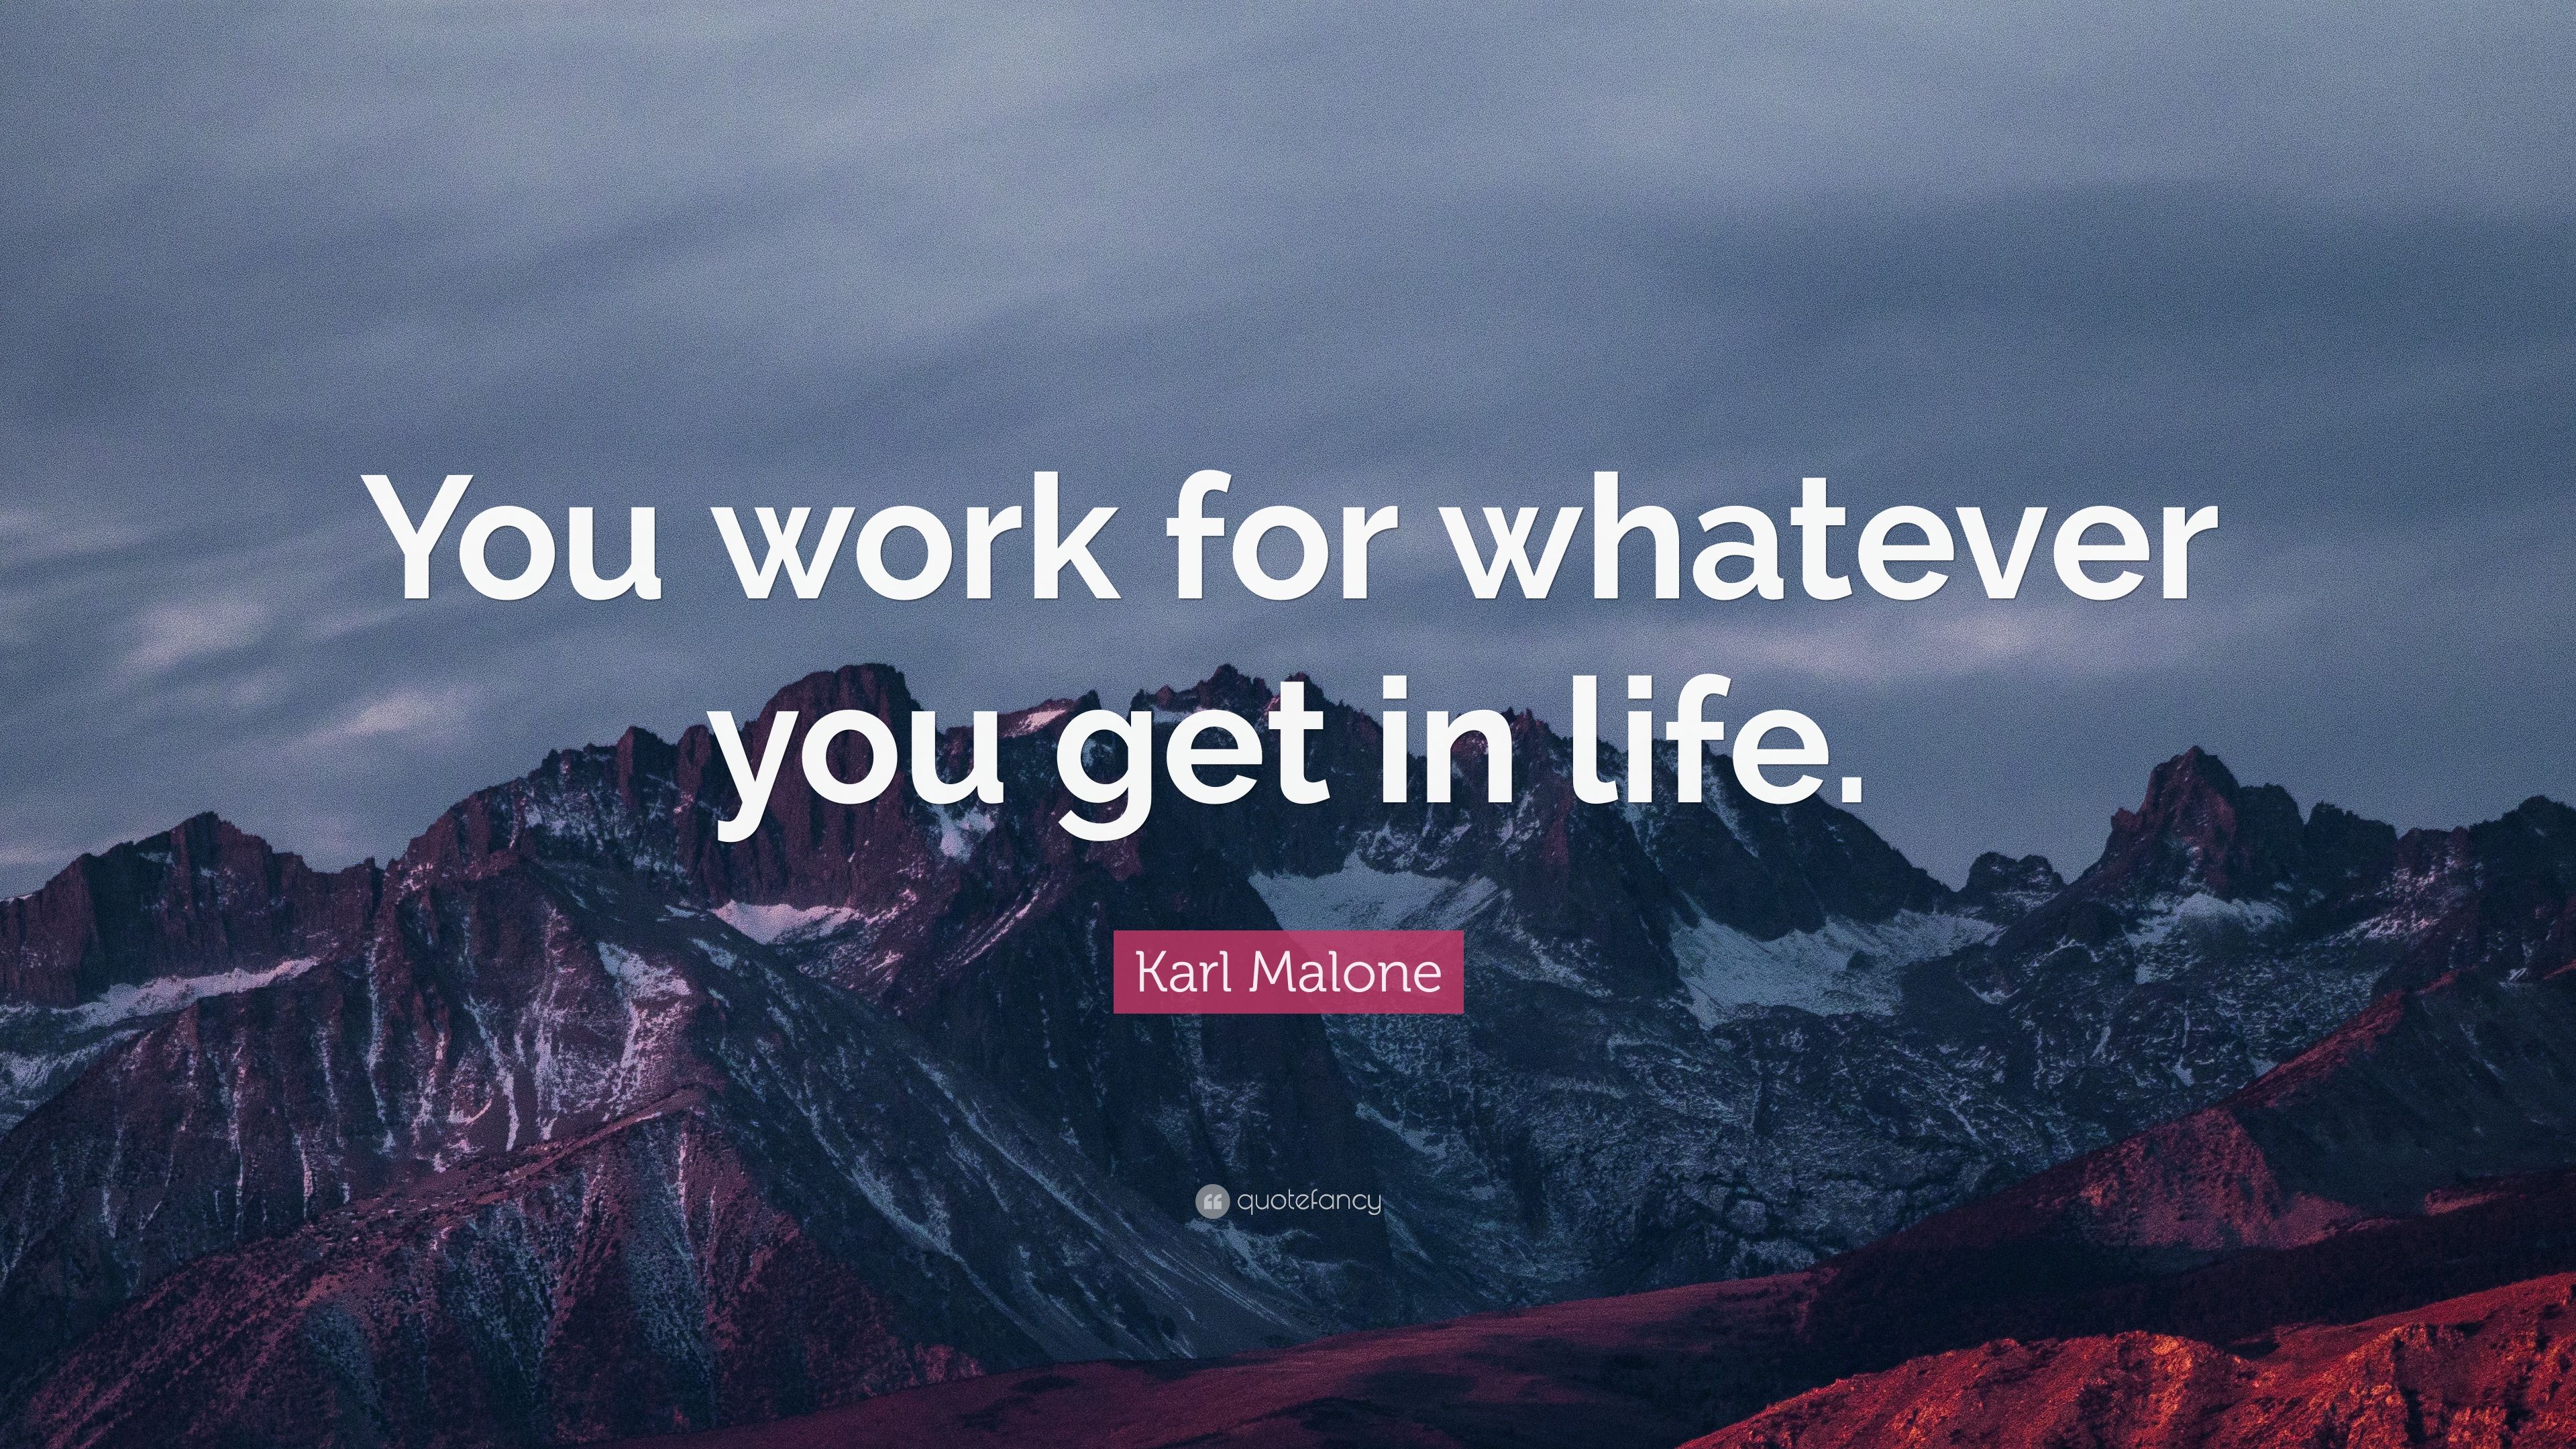 Karl Malone Quote: “You work for whatever you get in life.” 7